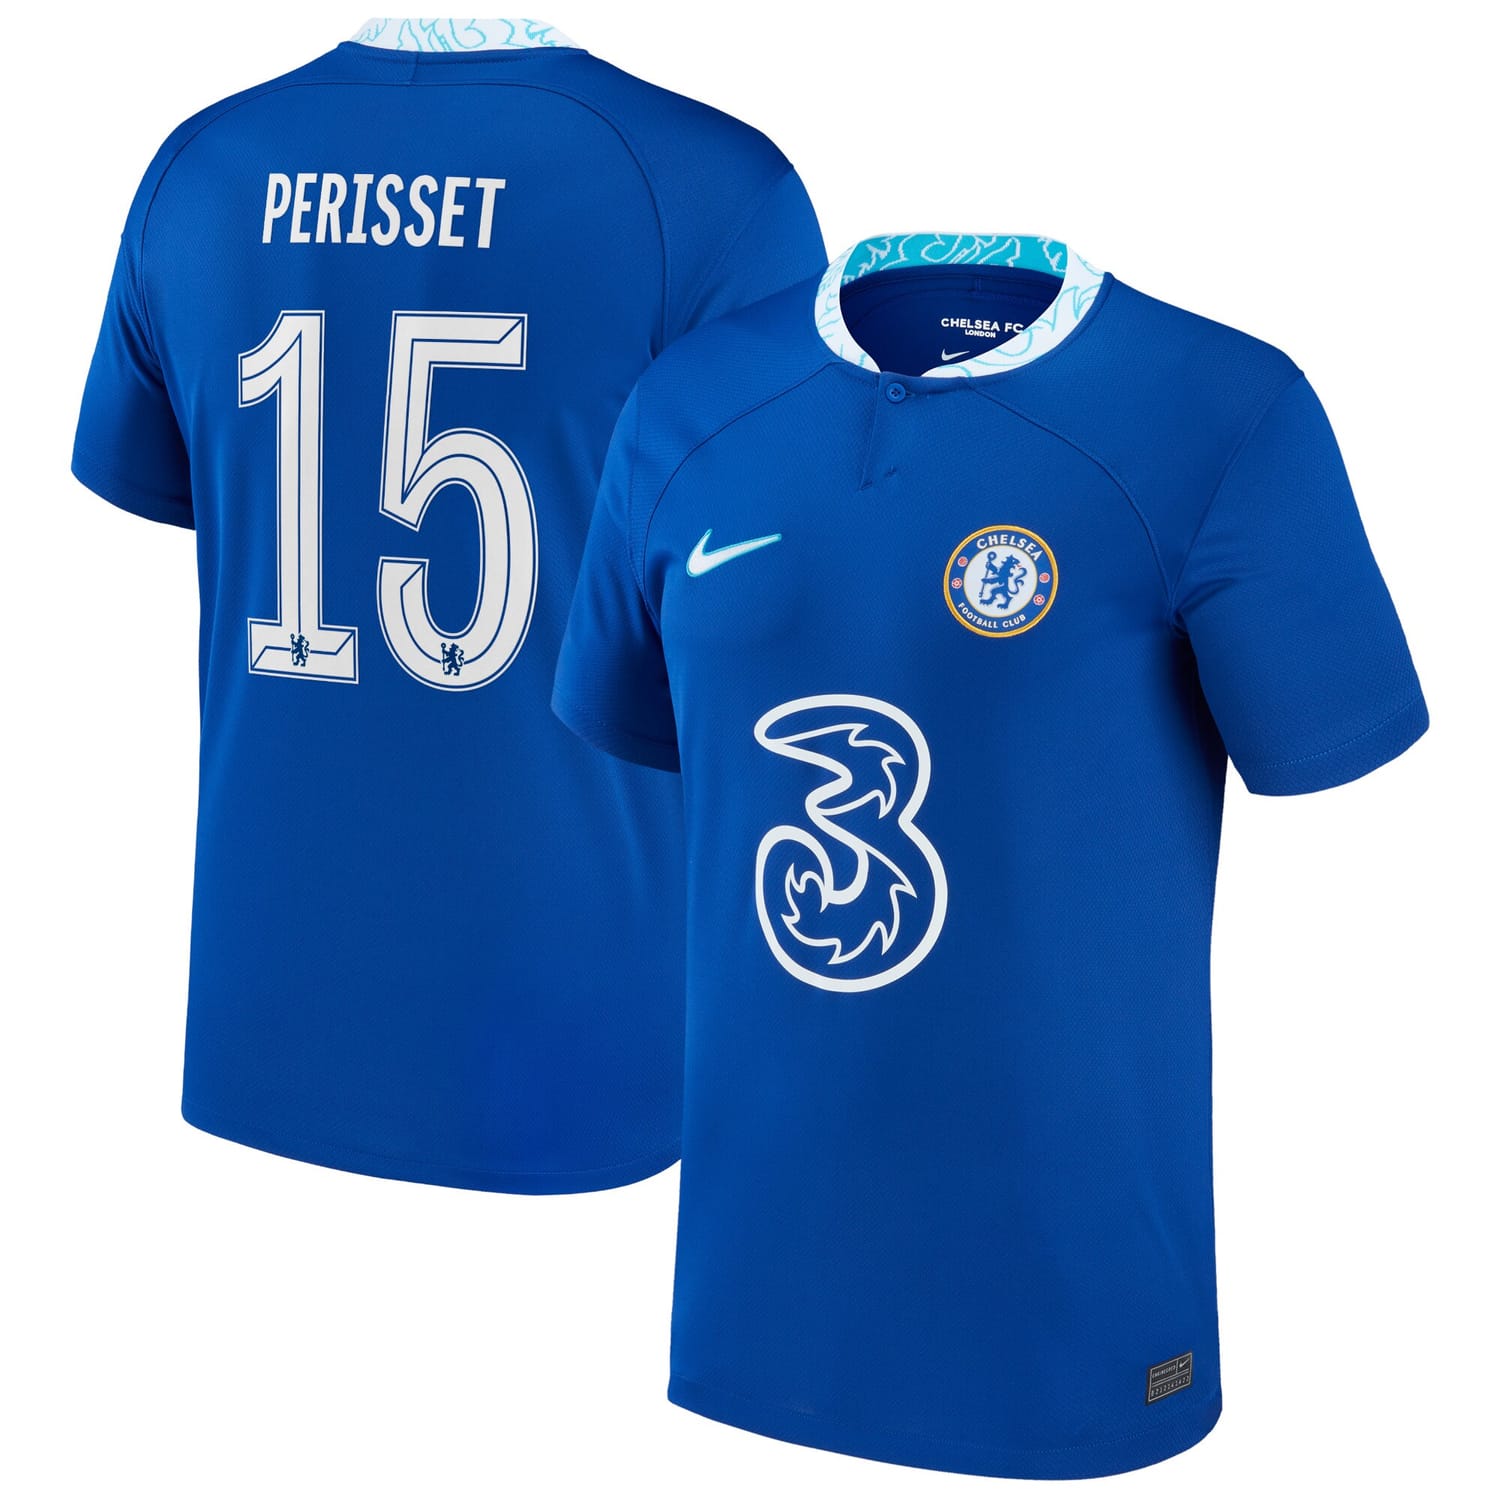 Premier League Chelsea Home Cup Jersey Shirt 2022-23 player Eve Perisset 15 printing for Men